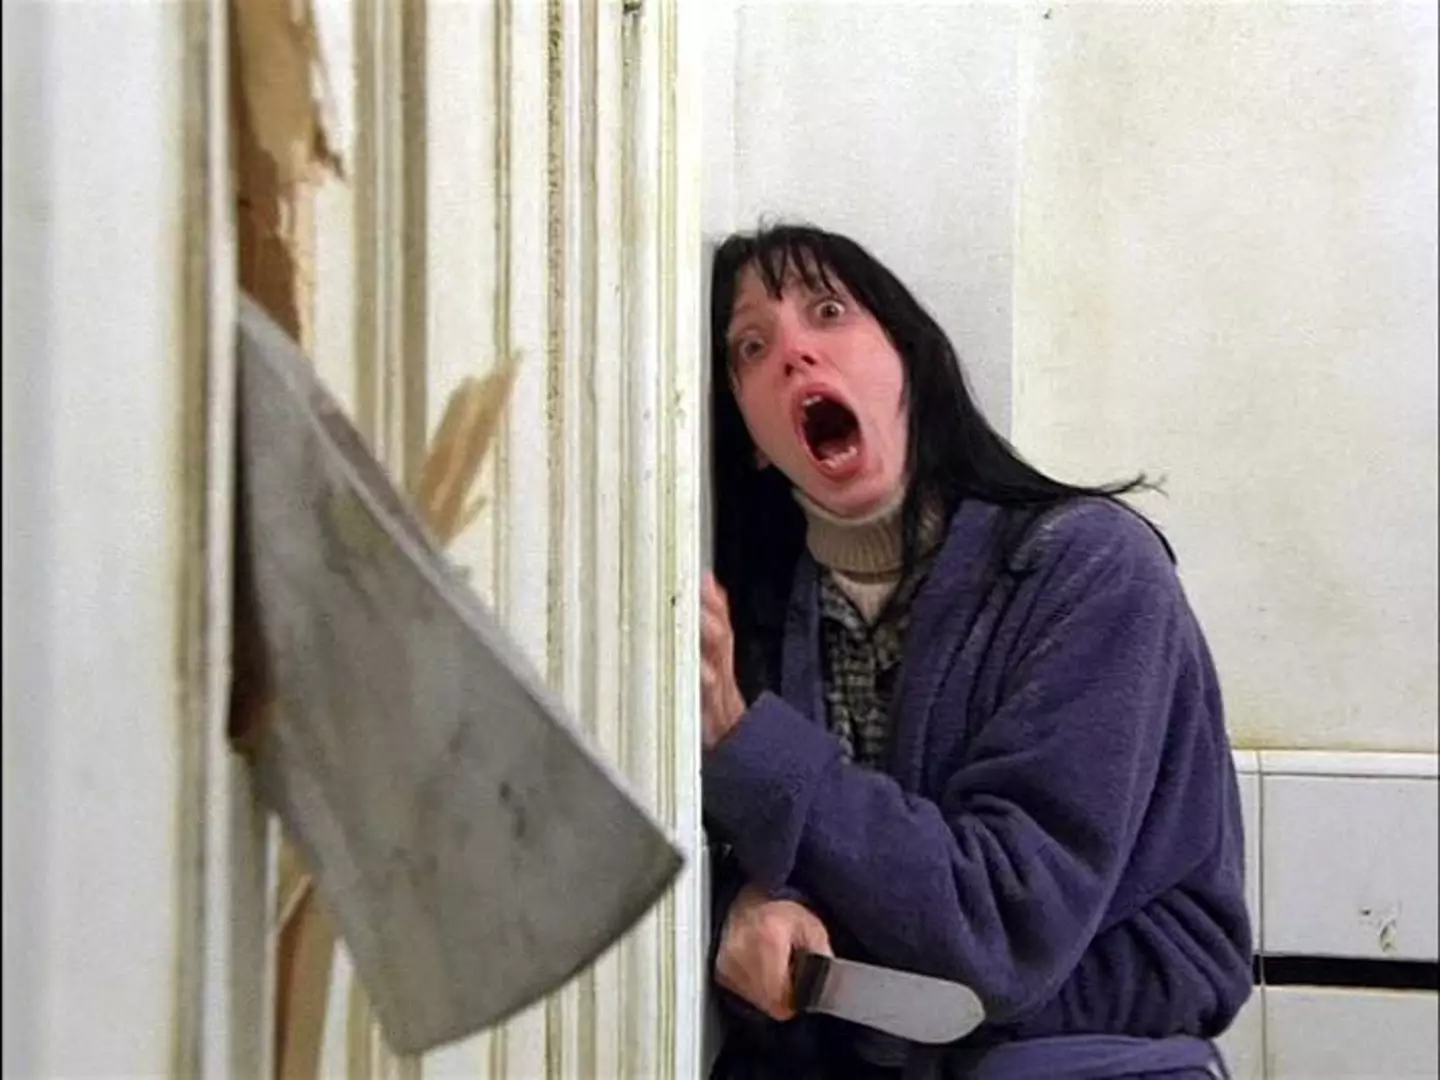 Doors are common in horror movies, like this one in The Shining.